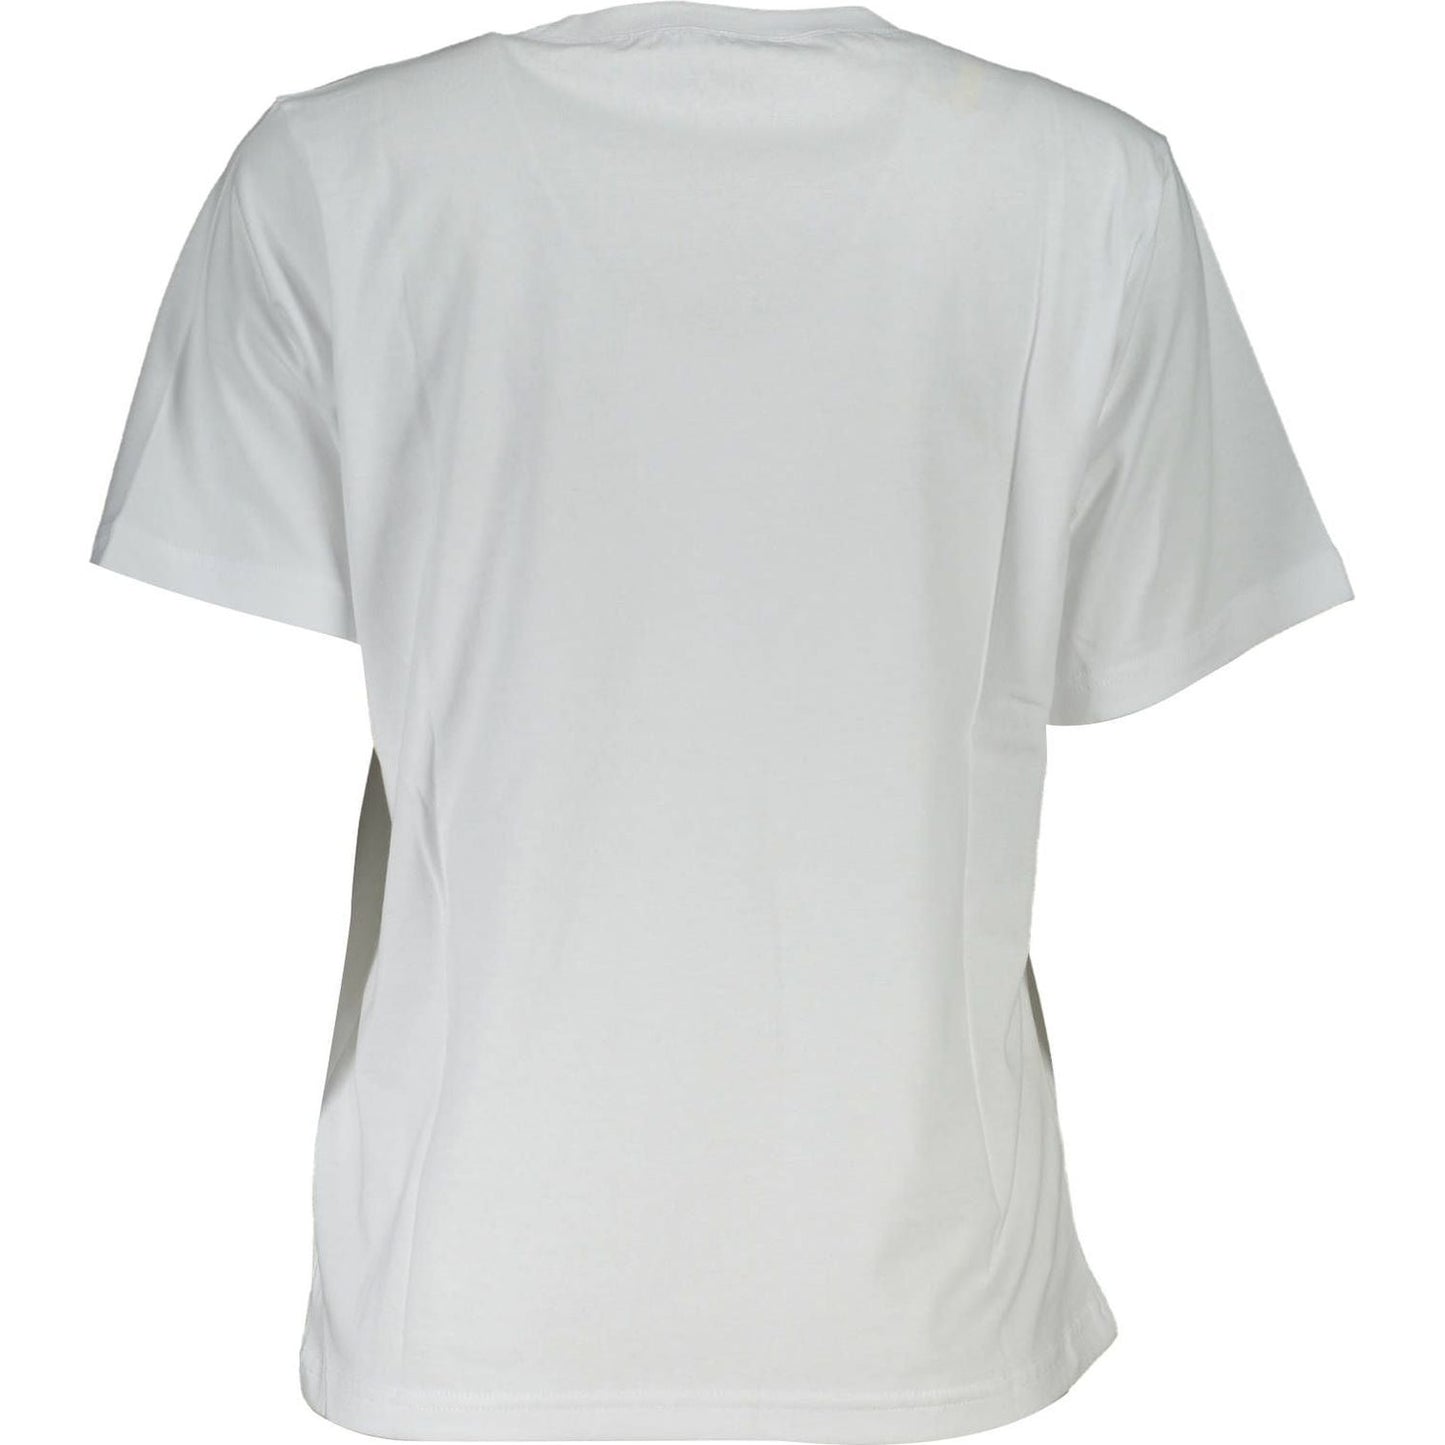 North Sails Eco-Conscious White Tee with Signature Print eco-conscious-white-tee-with-signature-print